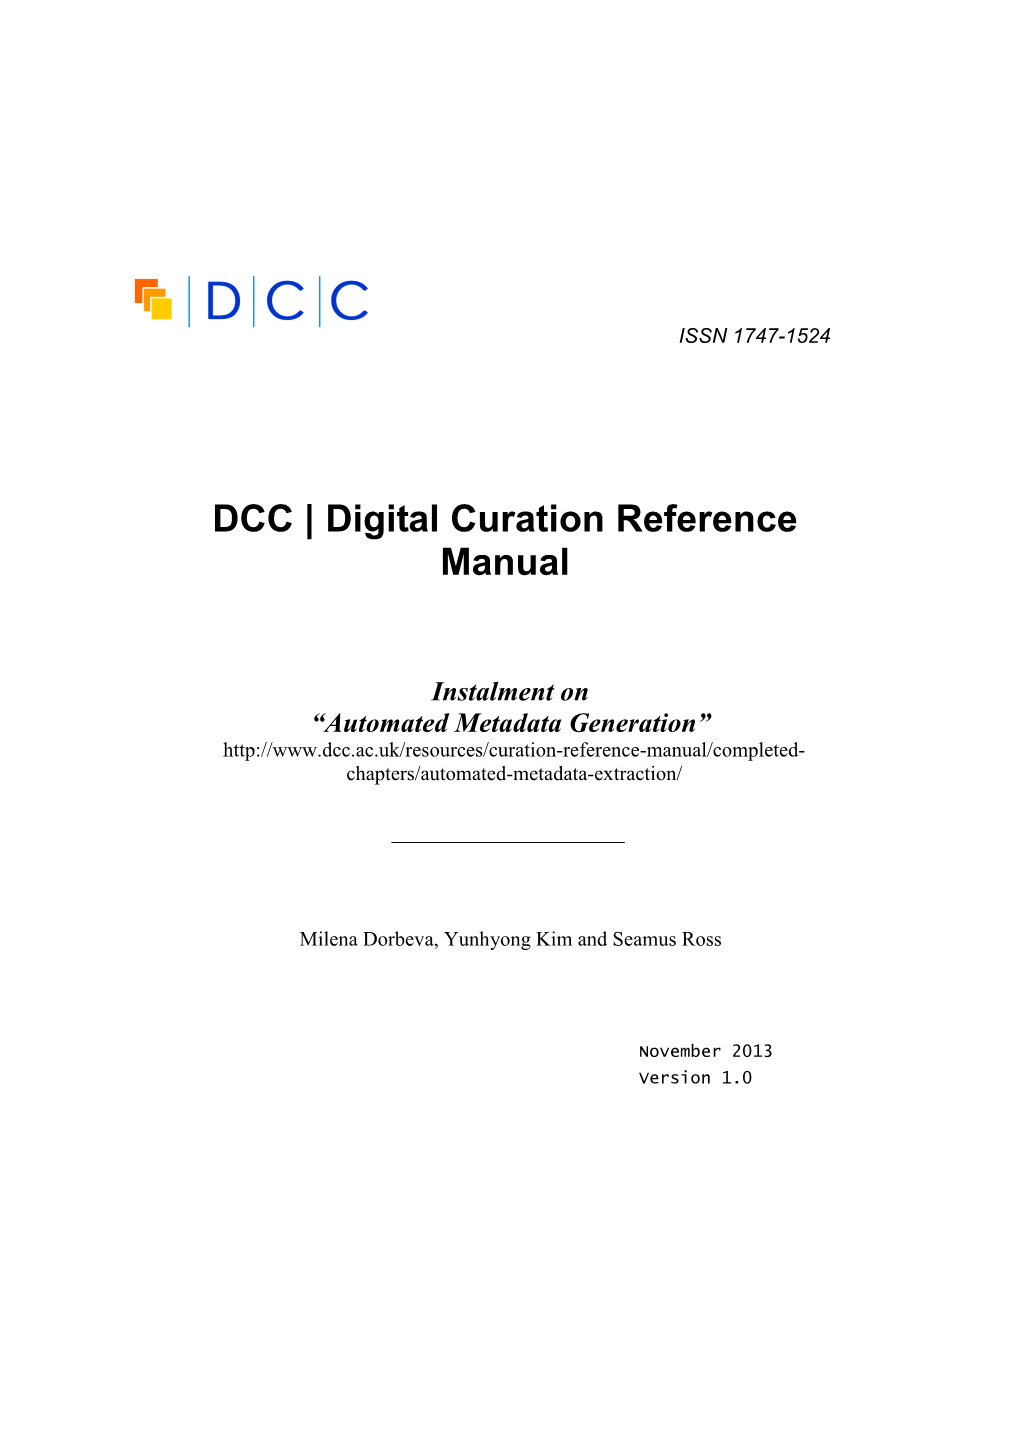 DCC | Digital Curation Reference Manual